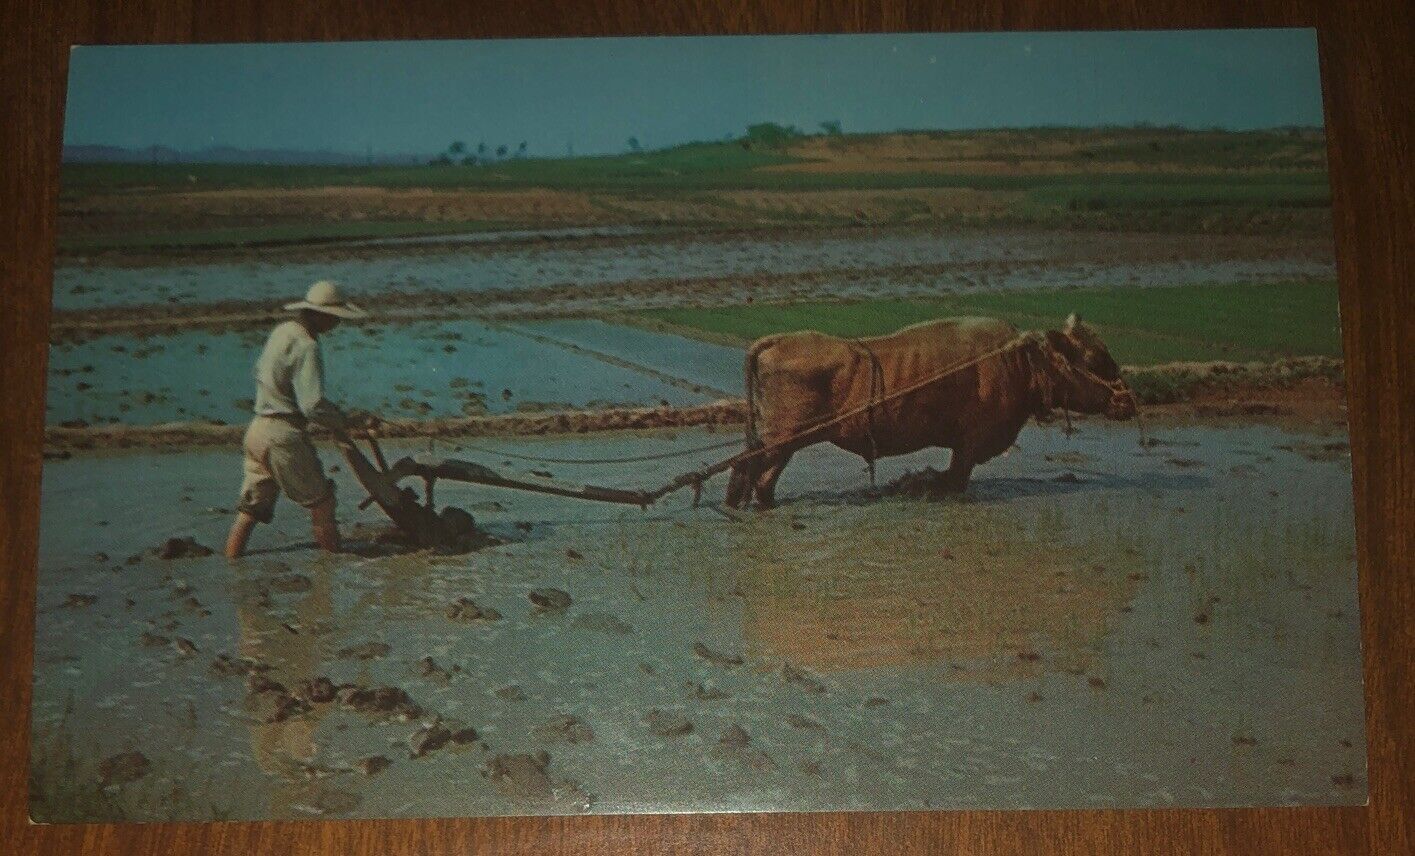 A Typical View Of Plowing a Rice Paddy In Asia Chrome Photo Postcard From Korea